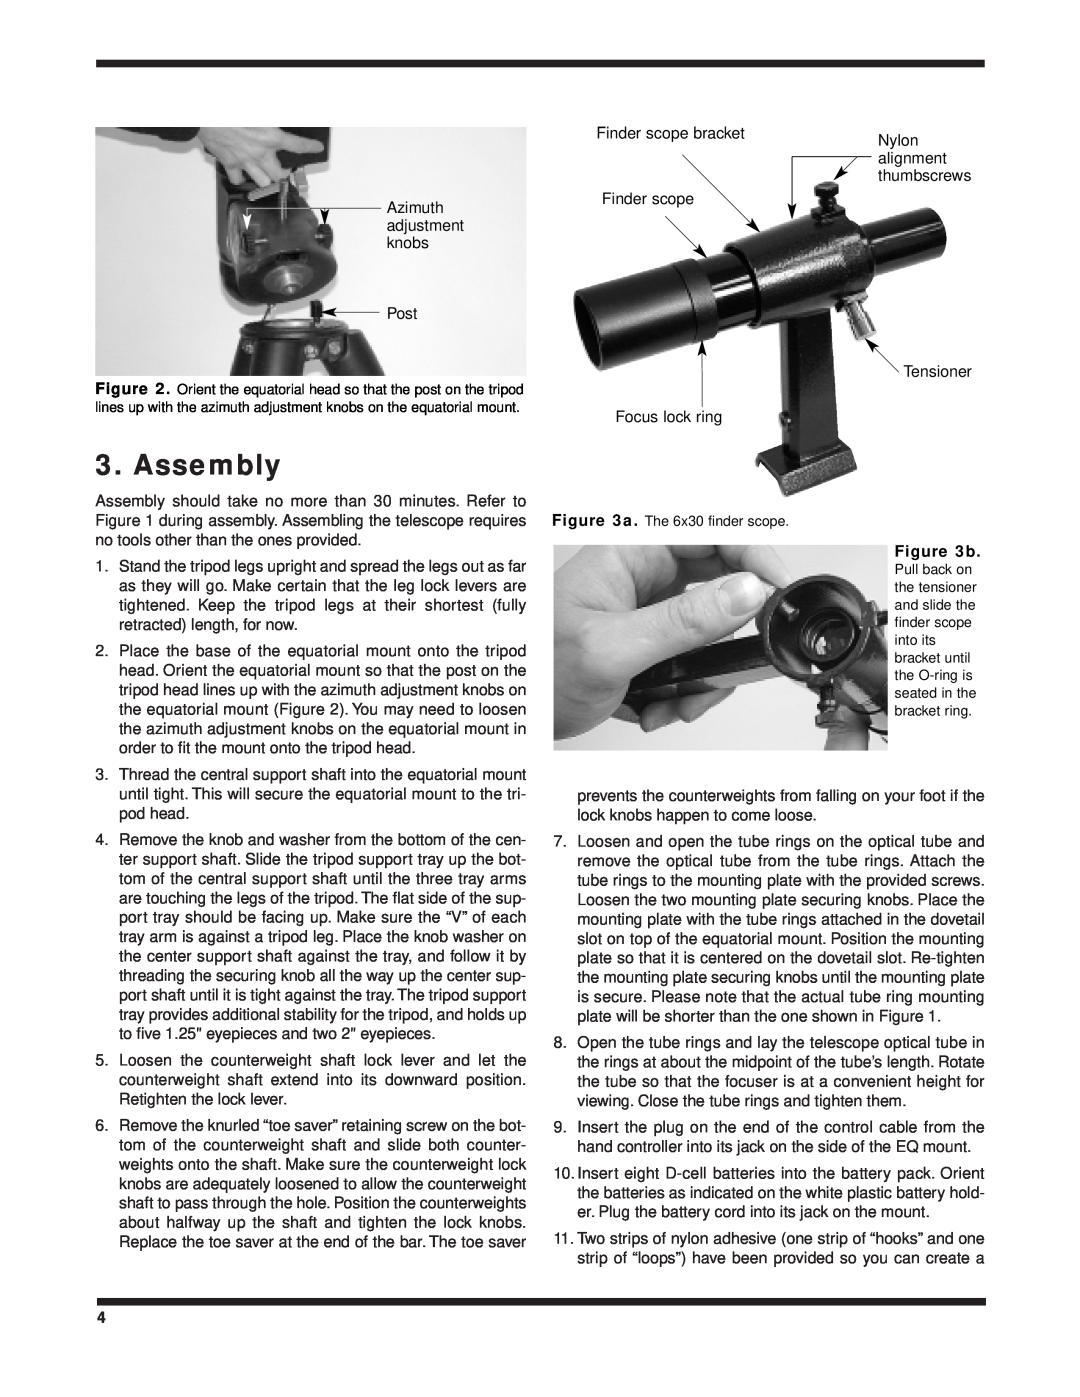 Orion 8 EQ instruction manual Assembly 